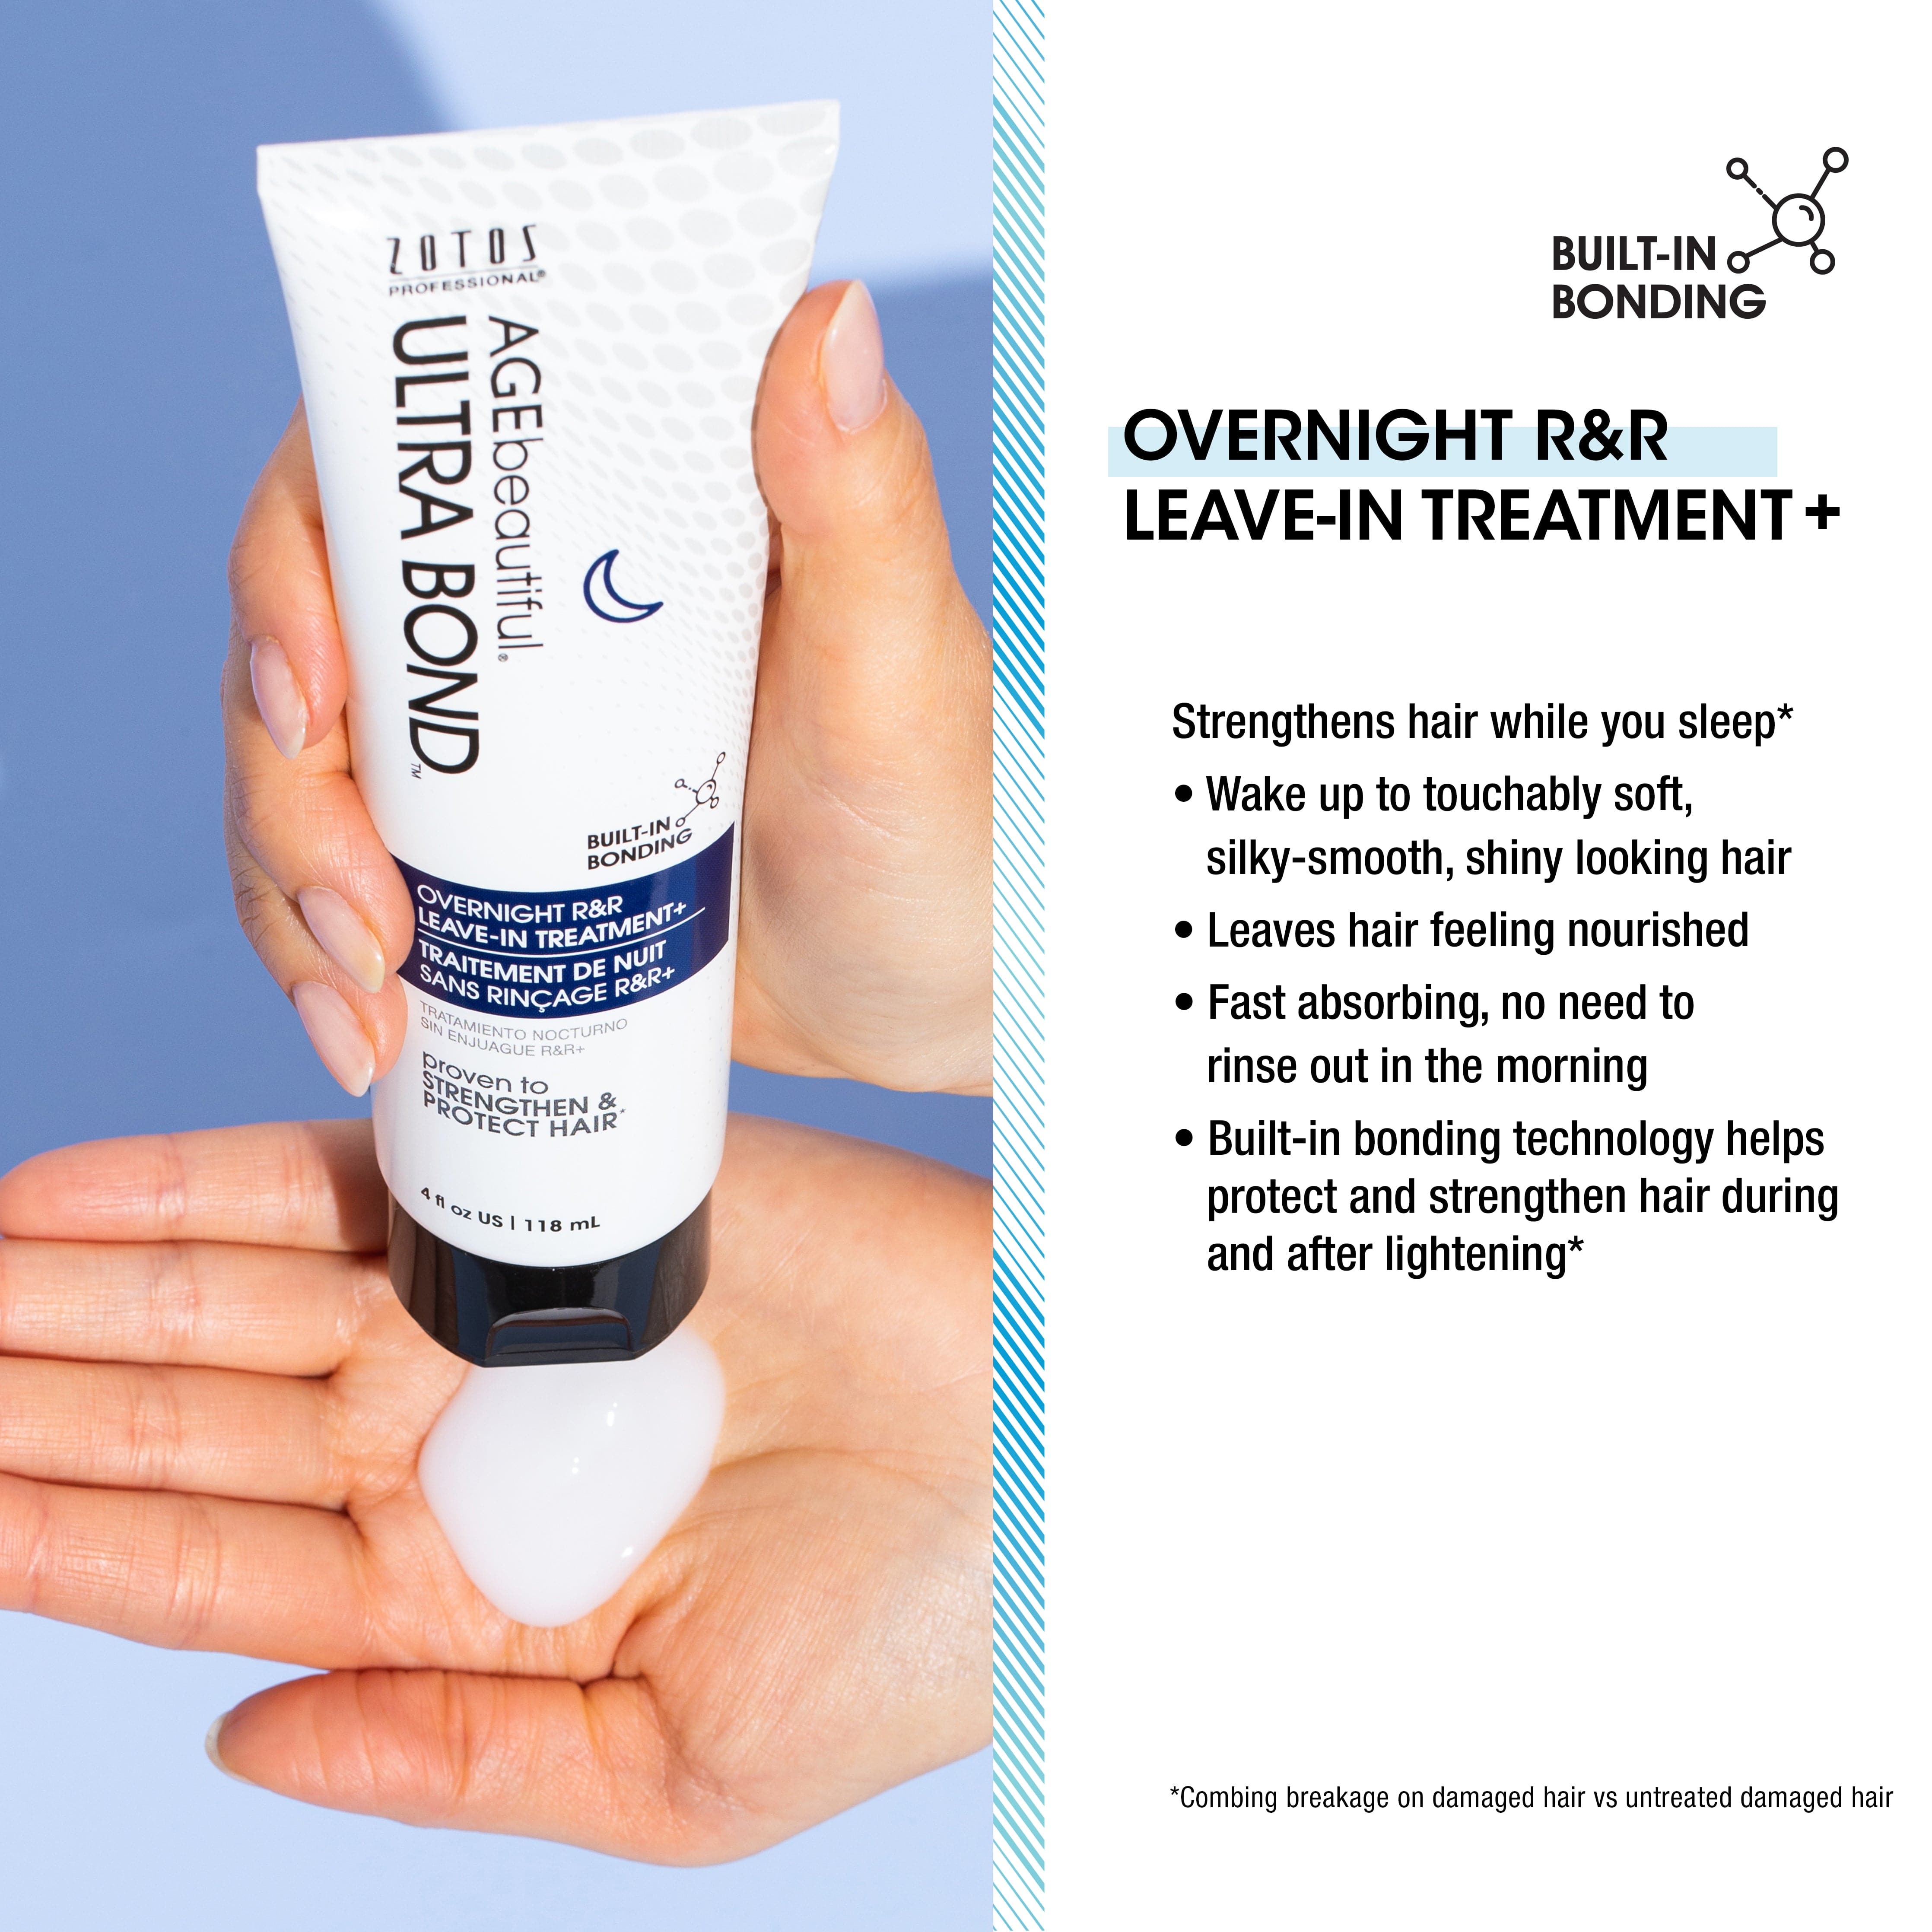 AGEbeautiful® Ultra Bond™ Overnight R&R Leave-in Treatment+ strengthens hair while you sleep. 